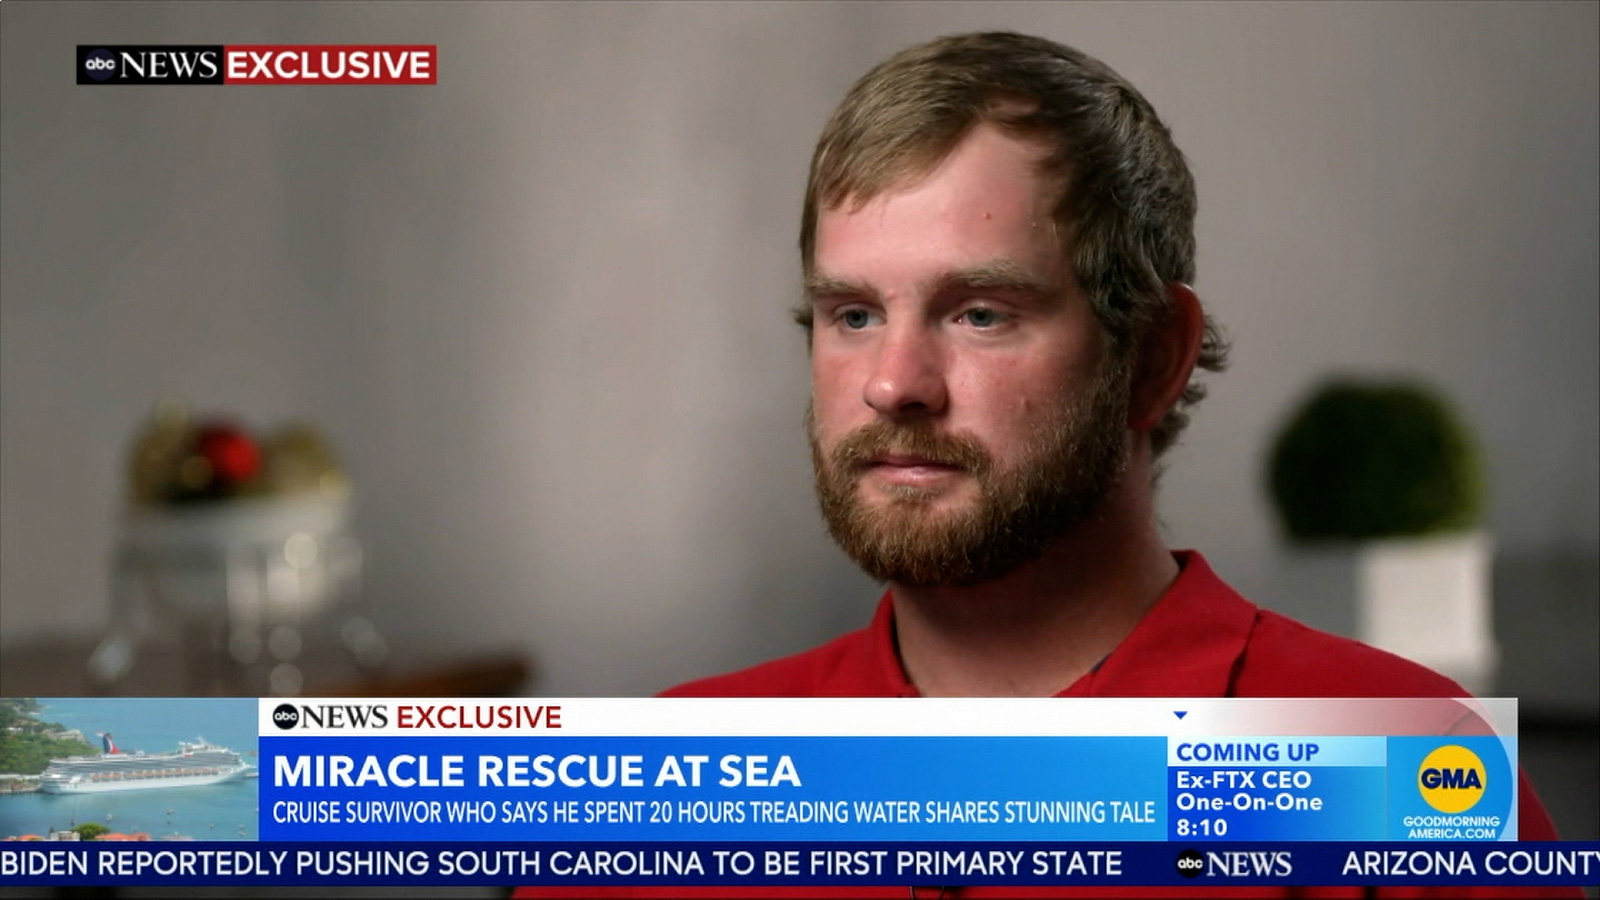 Cruise Ship Passenger Rescued From Ocean Isn’t Sure How He Went Overboard, He Tells ABC